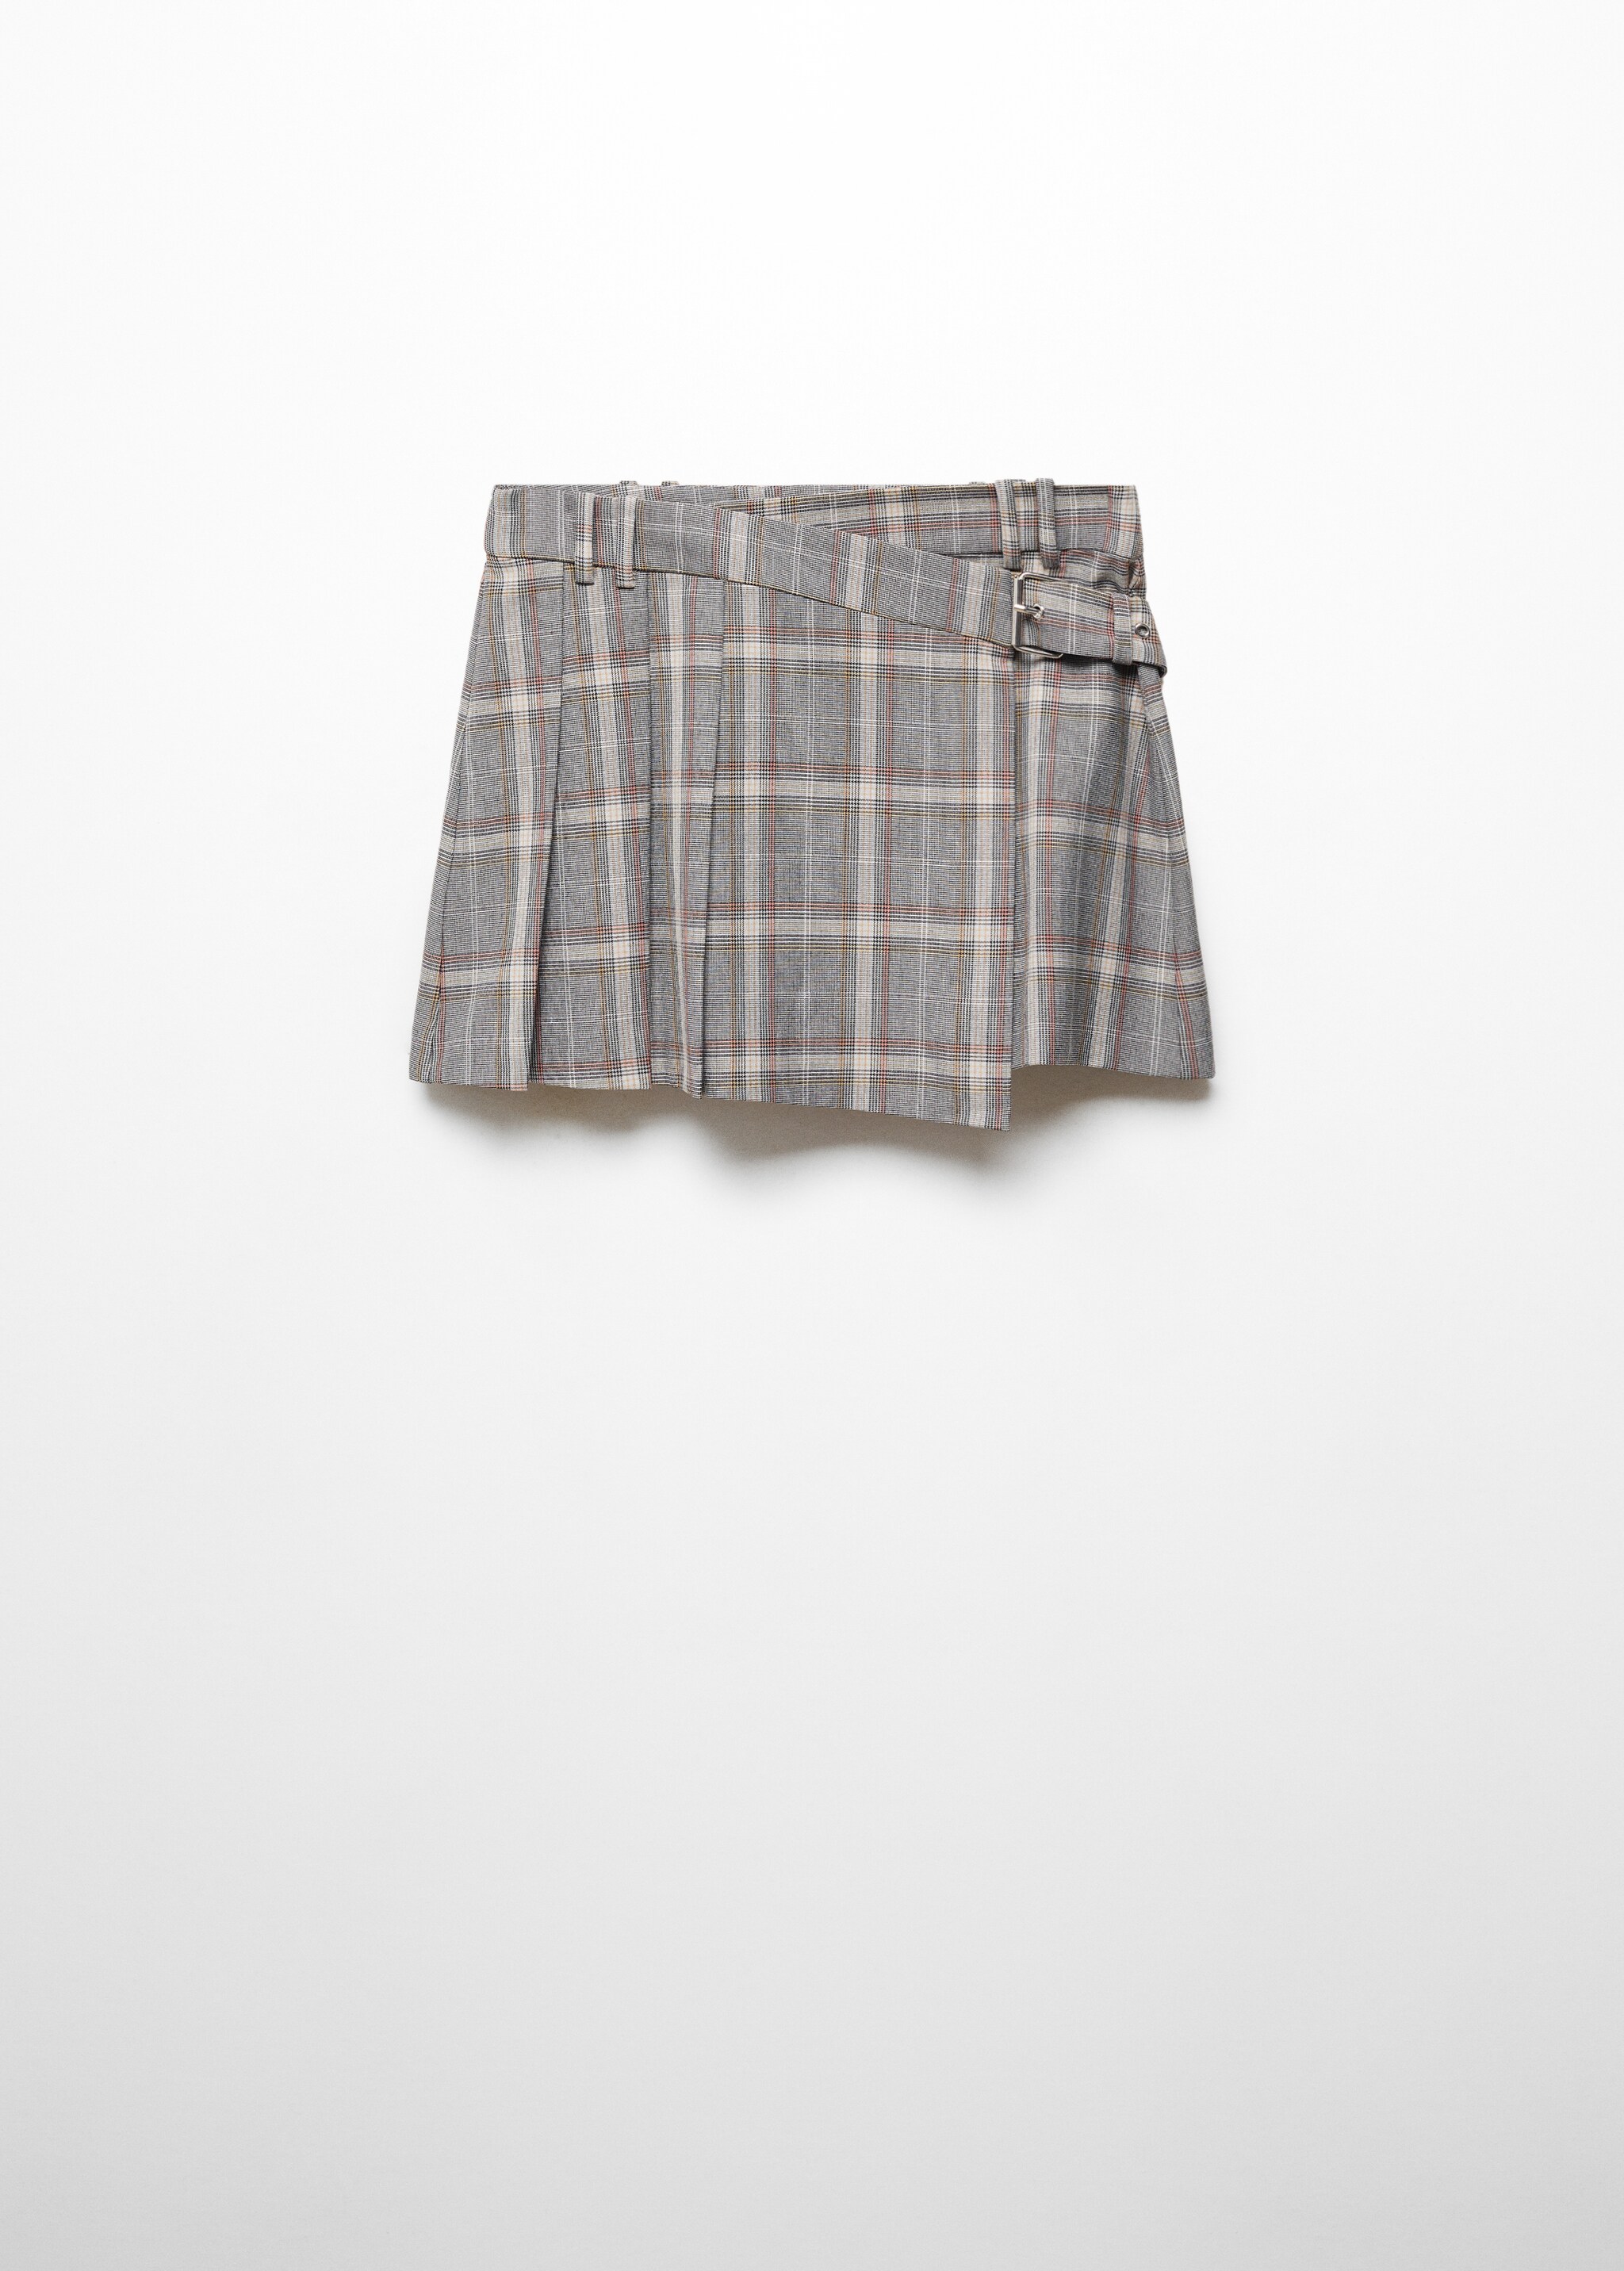 Plaid miniskirt - Article without model